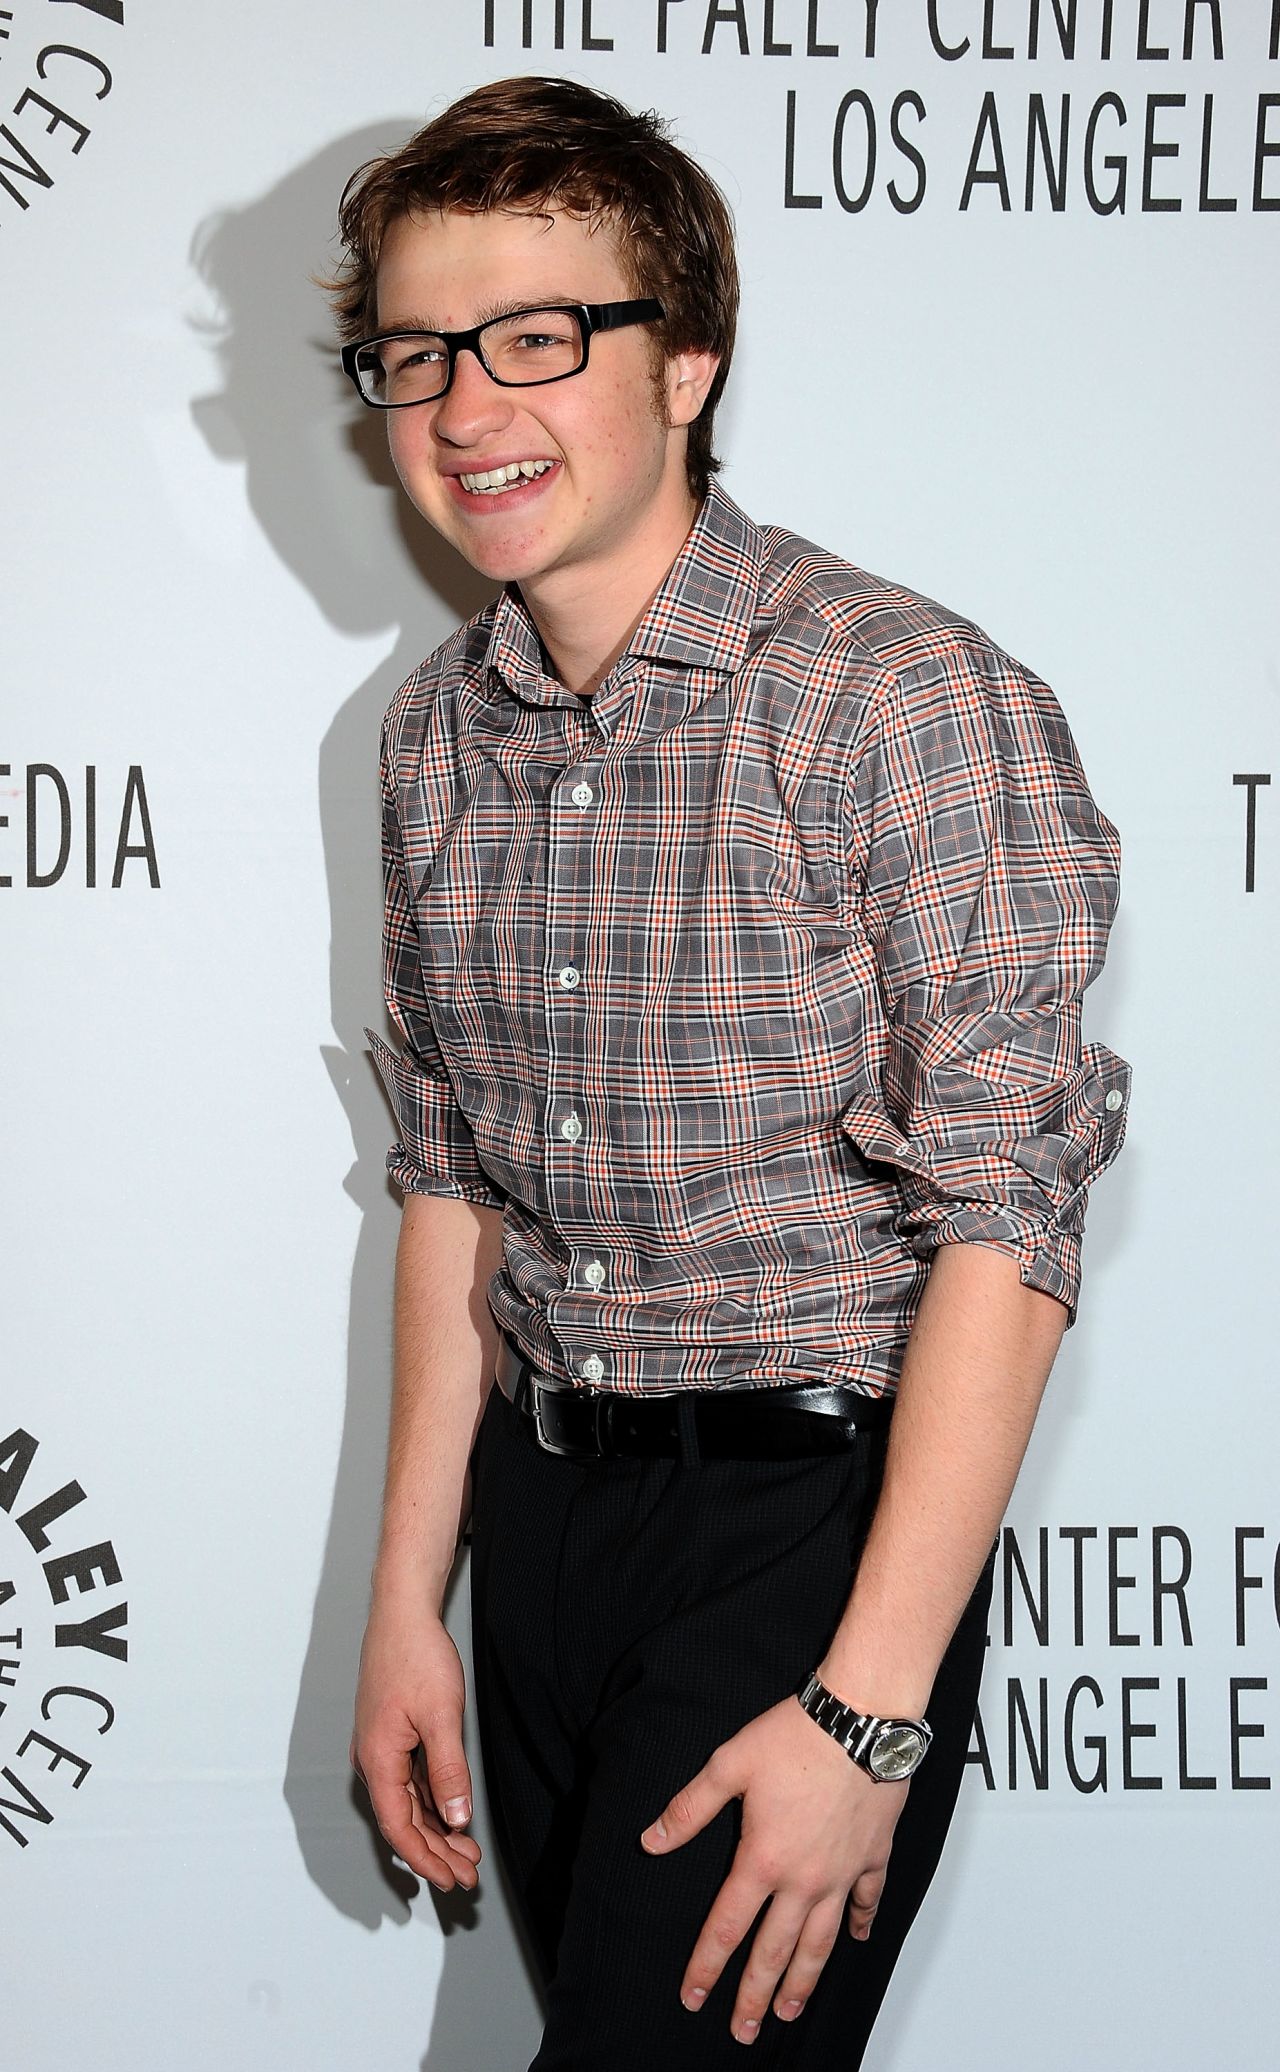 Angus T. Jones stirred the pot a bit when he <a href="http://marquee.blogs.cnn.com/2012/11/26/angus-t-jones-of-two-and-a-half-men-my-show-is-filth/">described his series "Two and a Half Men" as "filth"</a> and advised fans to stop watching. But he's not the first star to slam his employer ...